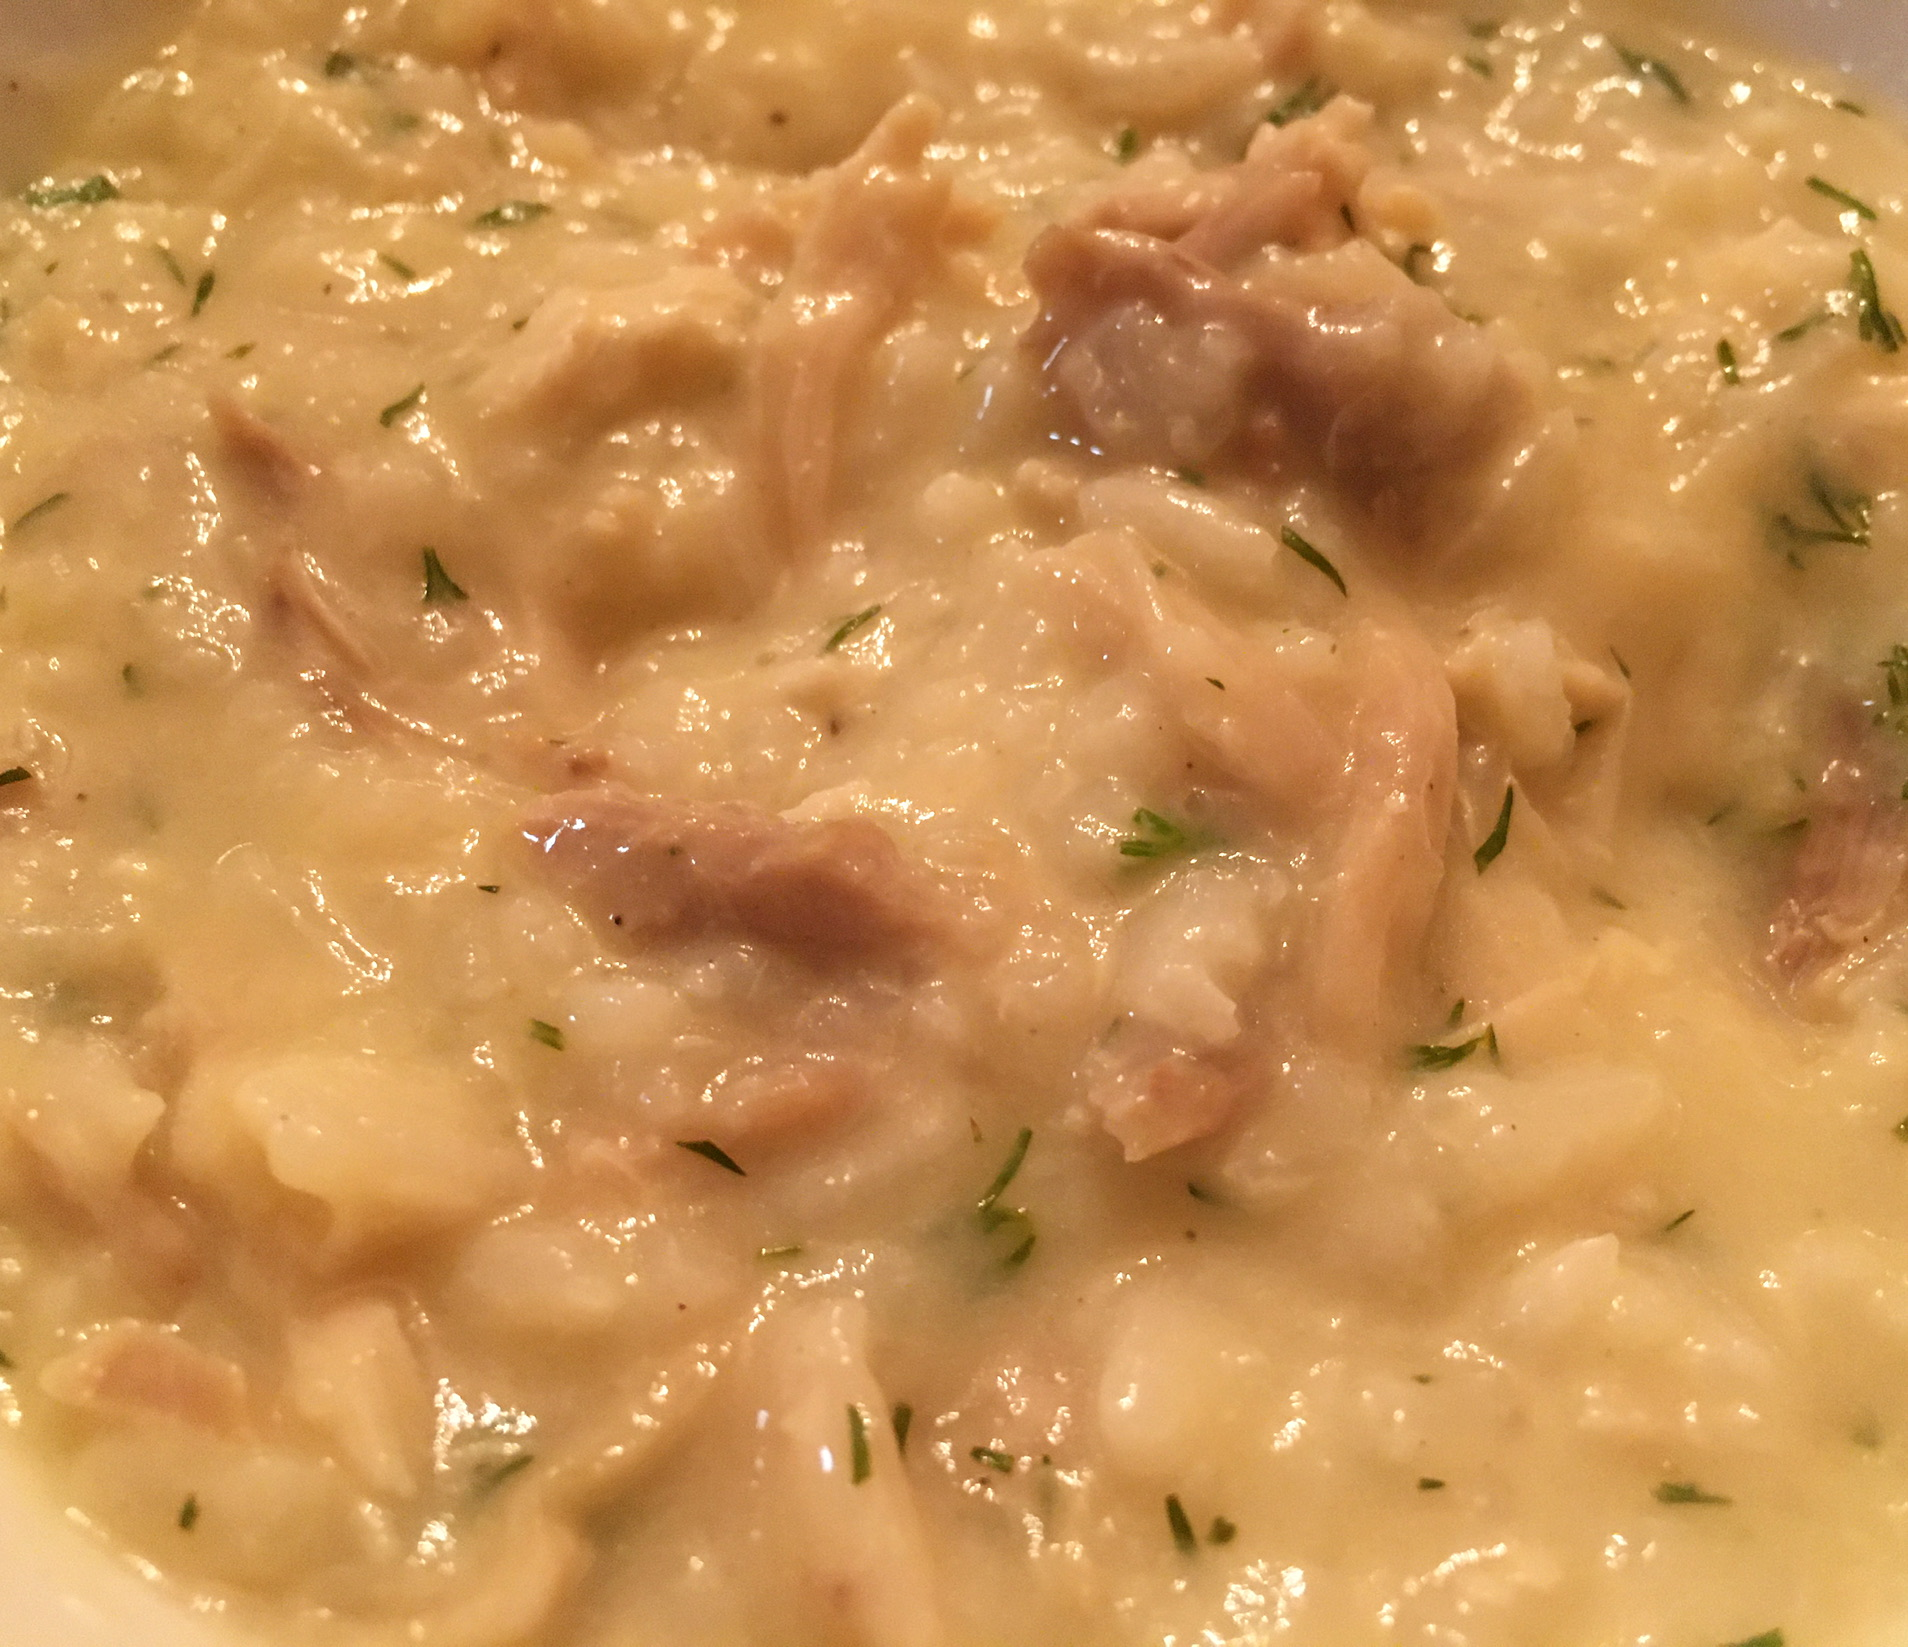 Close-up view of an opaque cream-colored soup, with bits of rice, chicken, and dill visible.